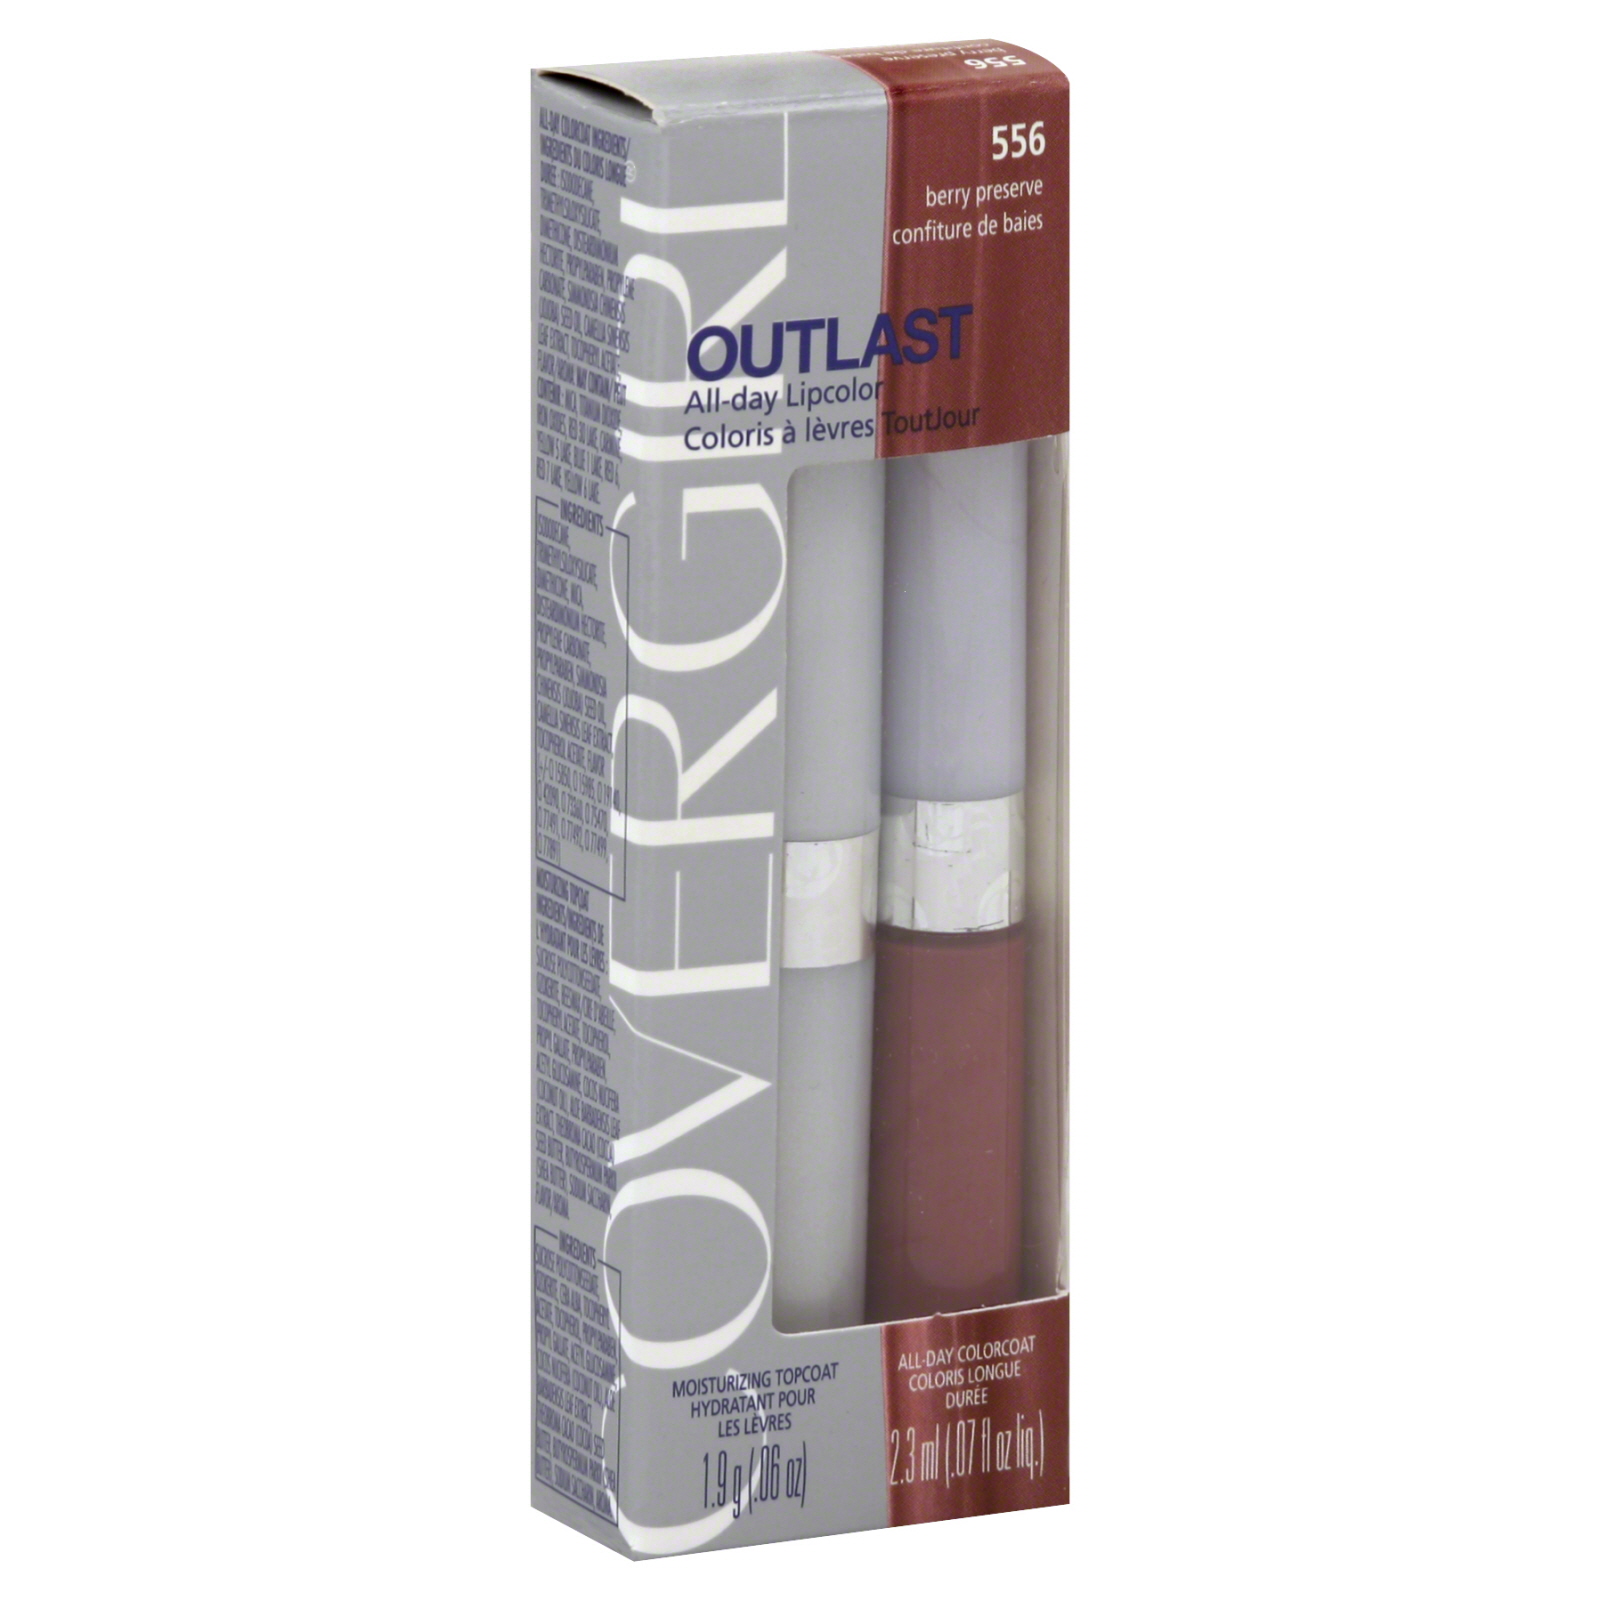 CoverGirl Outlast, Lipcolor, All-Day, Berry Preserve, 1 c